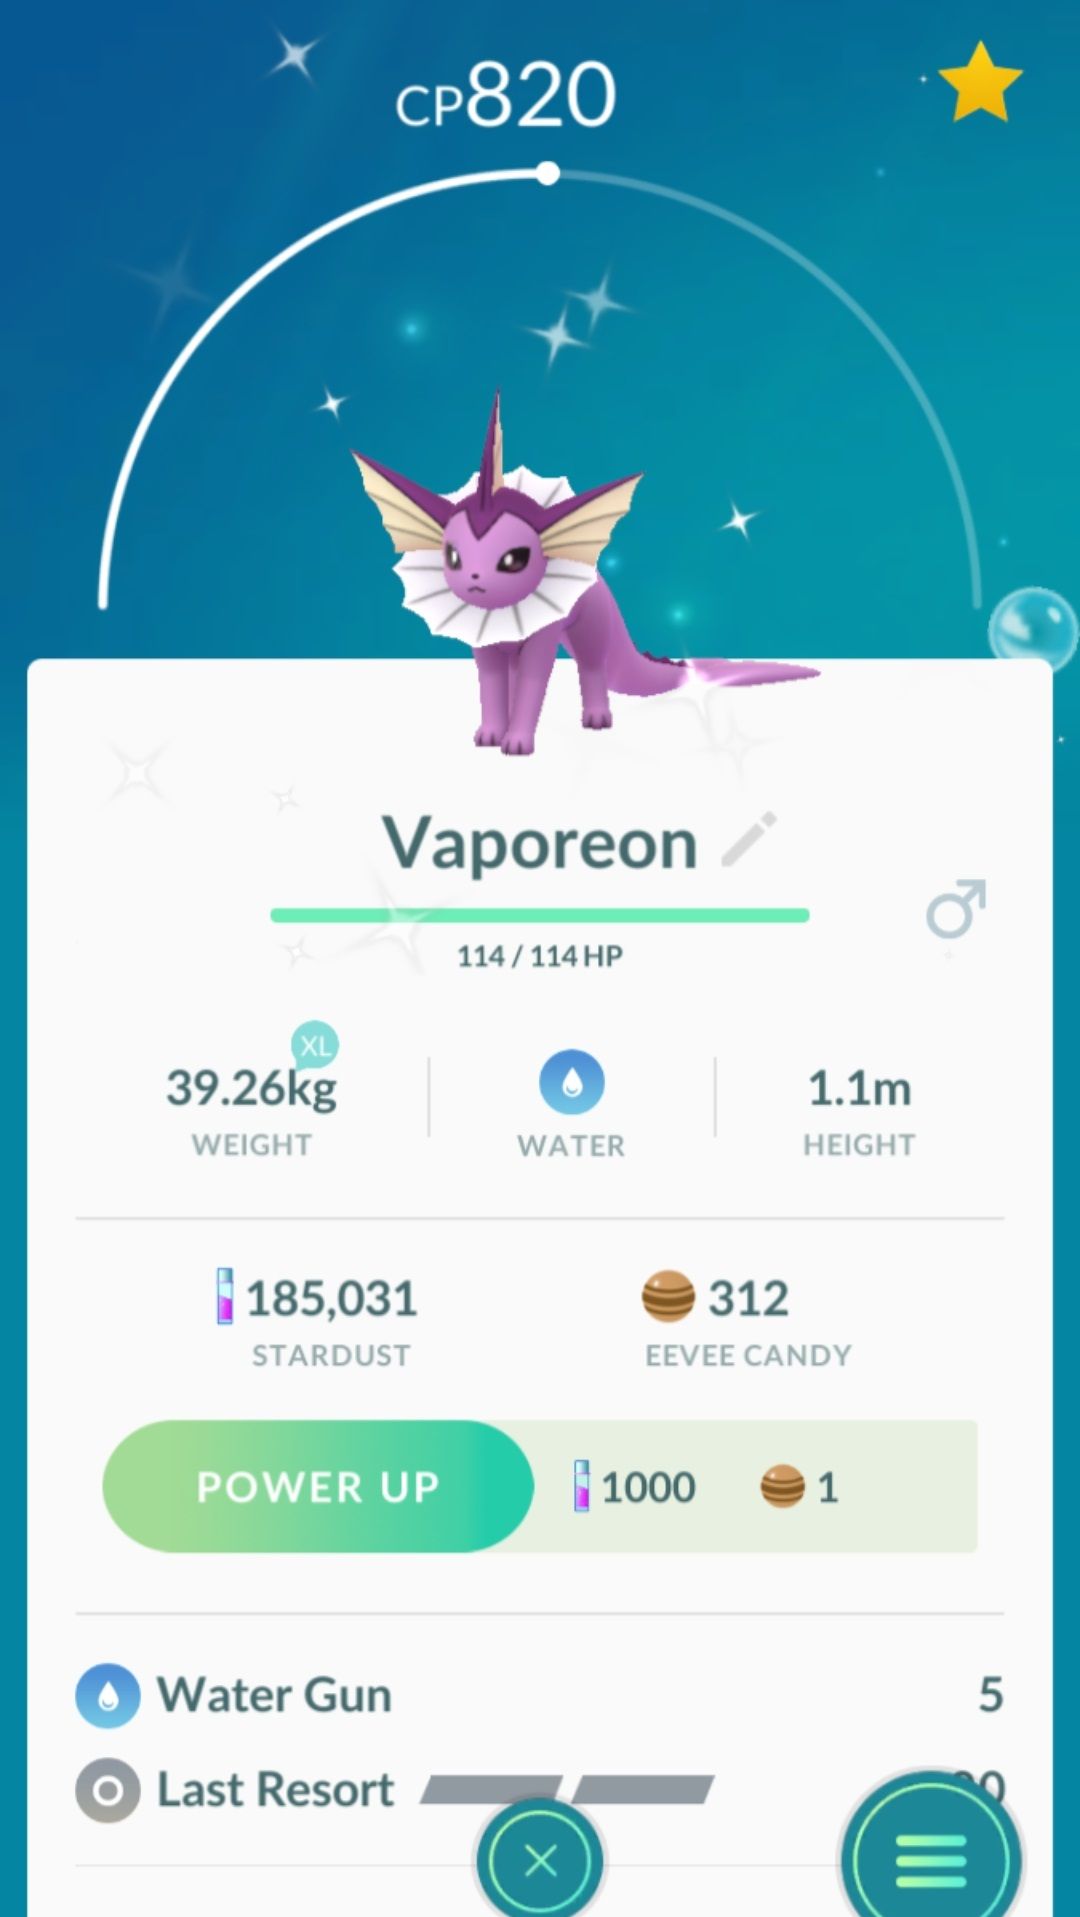 Guide] How to Catch a Shiny Poochyena in Pokemon Go